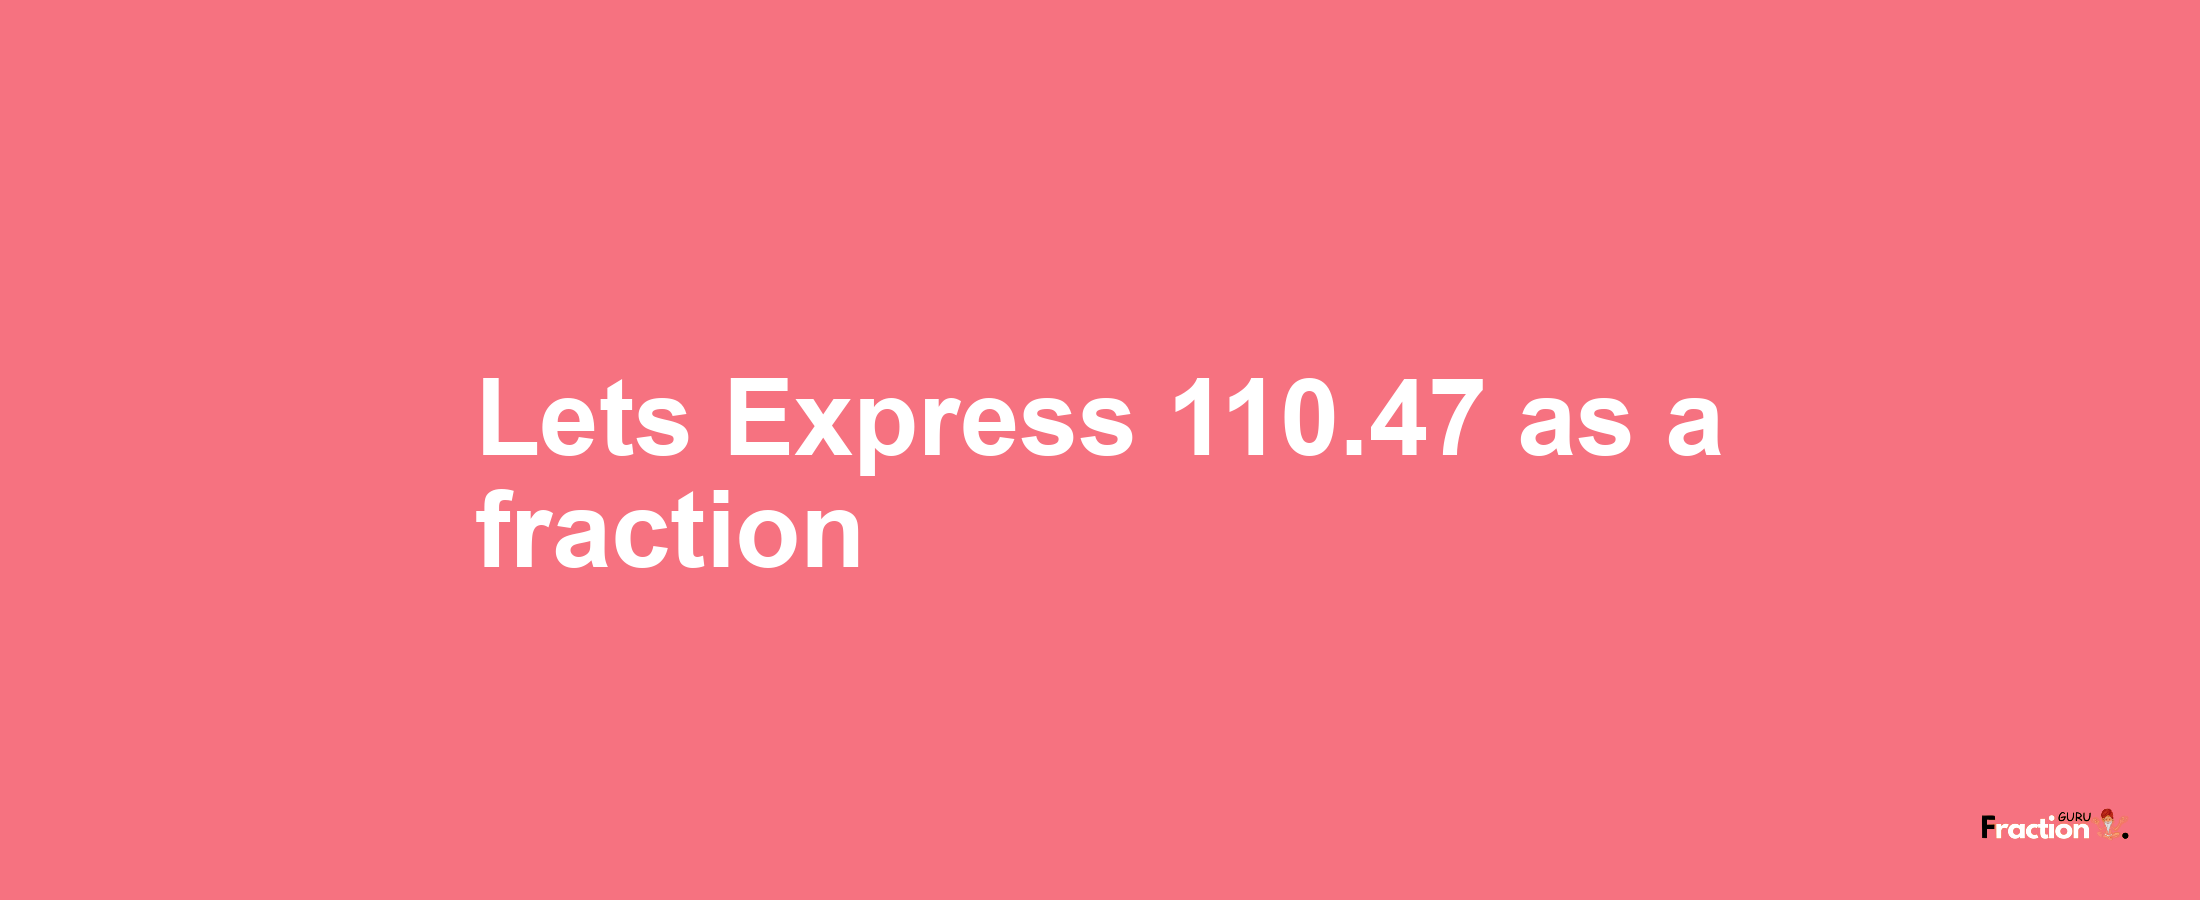 Lets Express 110.47 as afraction